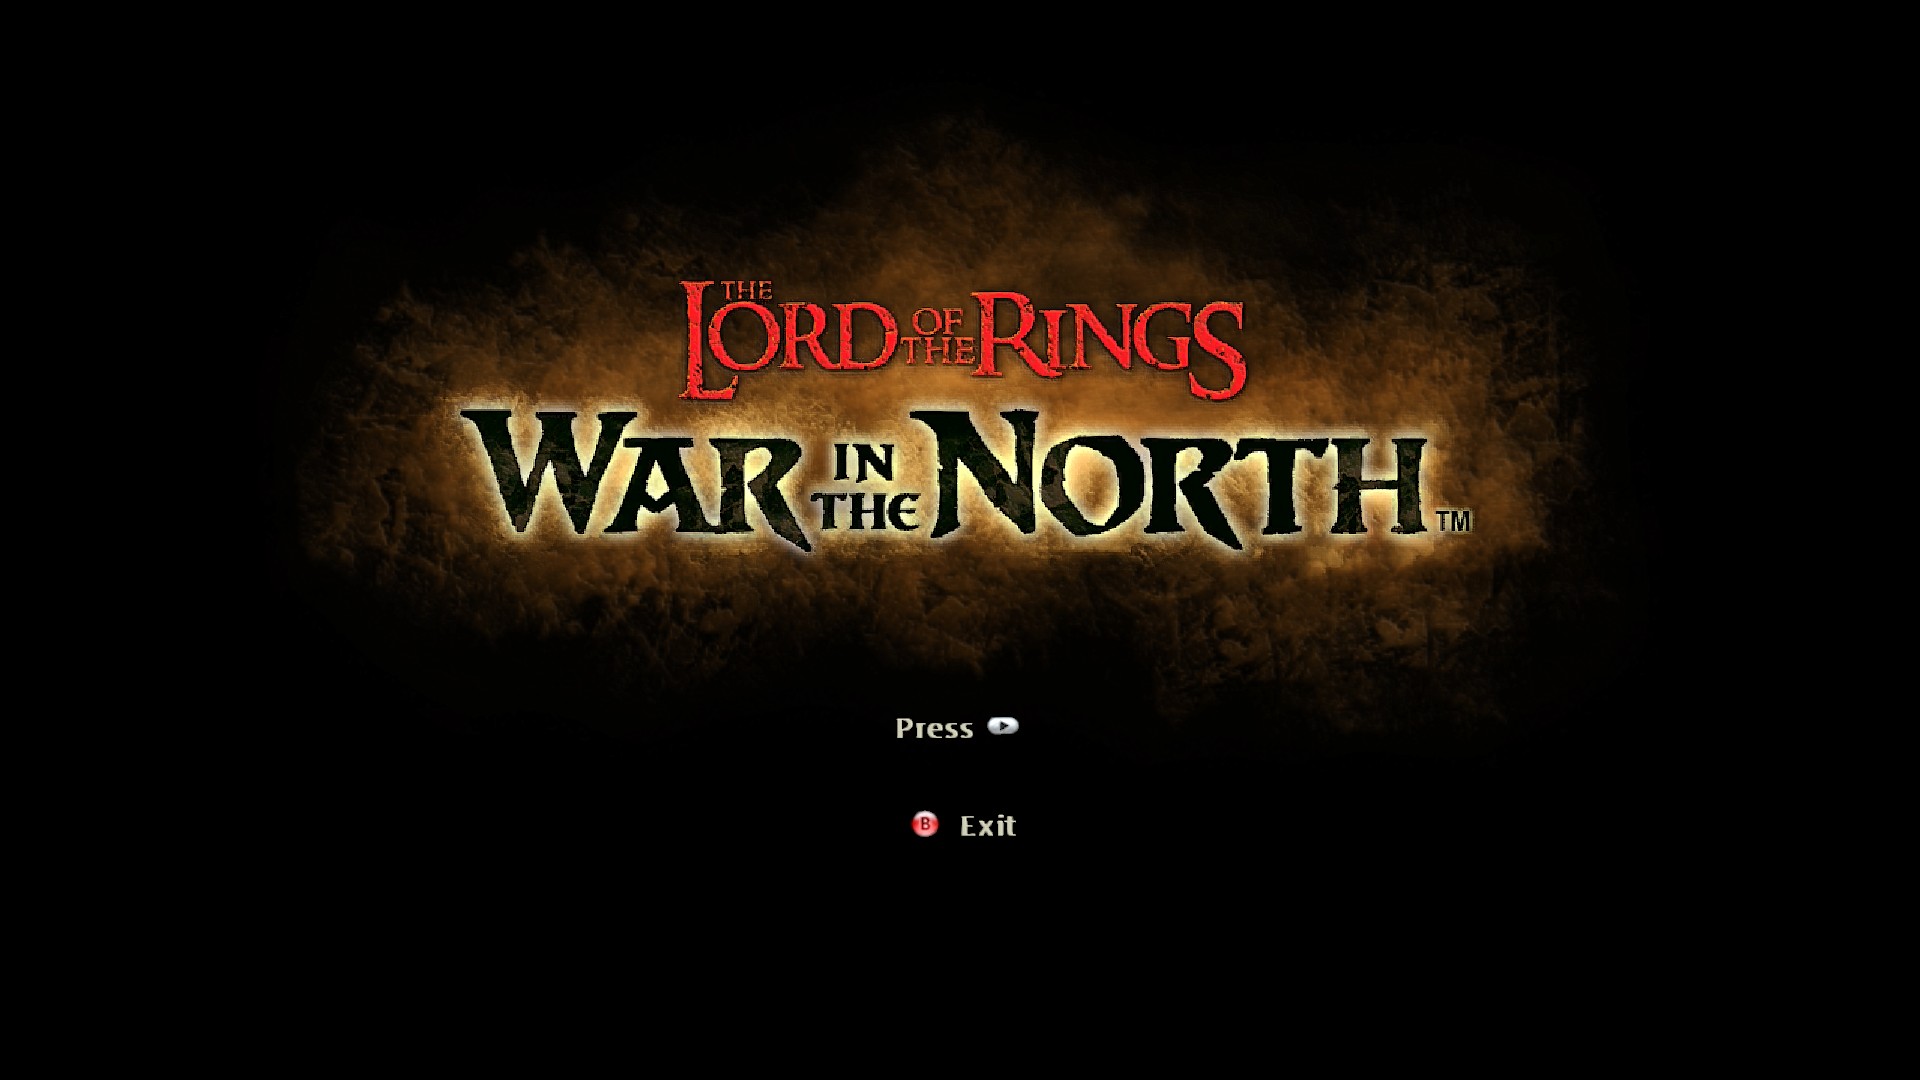 The lord of the rings war in the north купить ключ steam фото 77